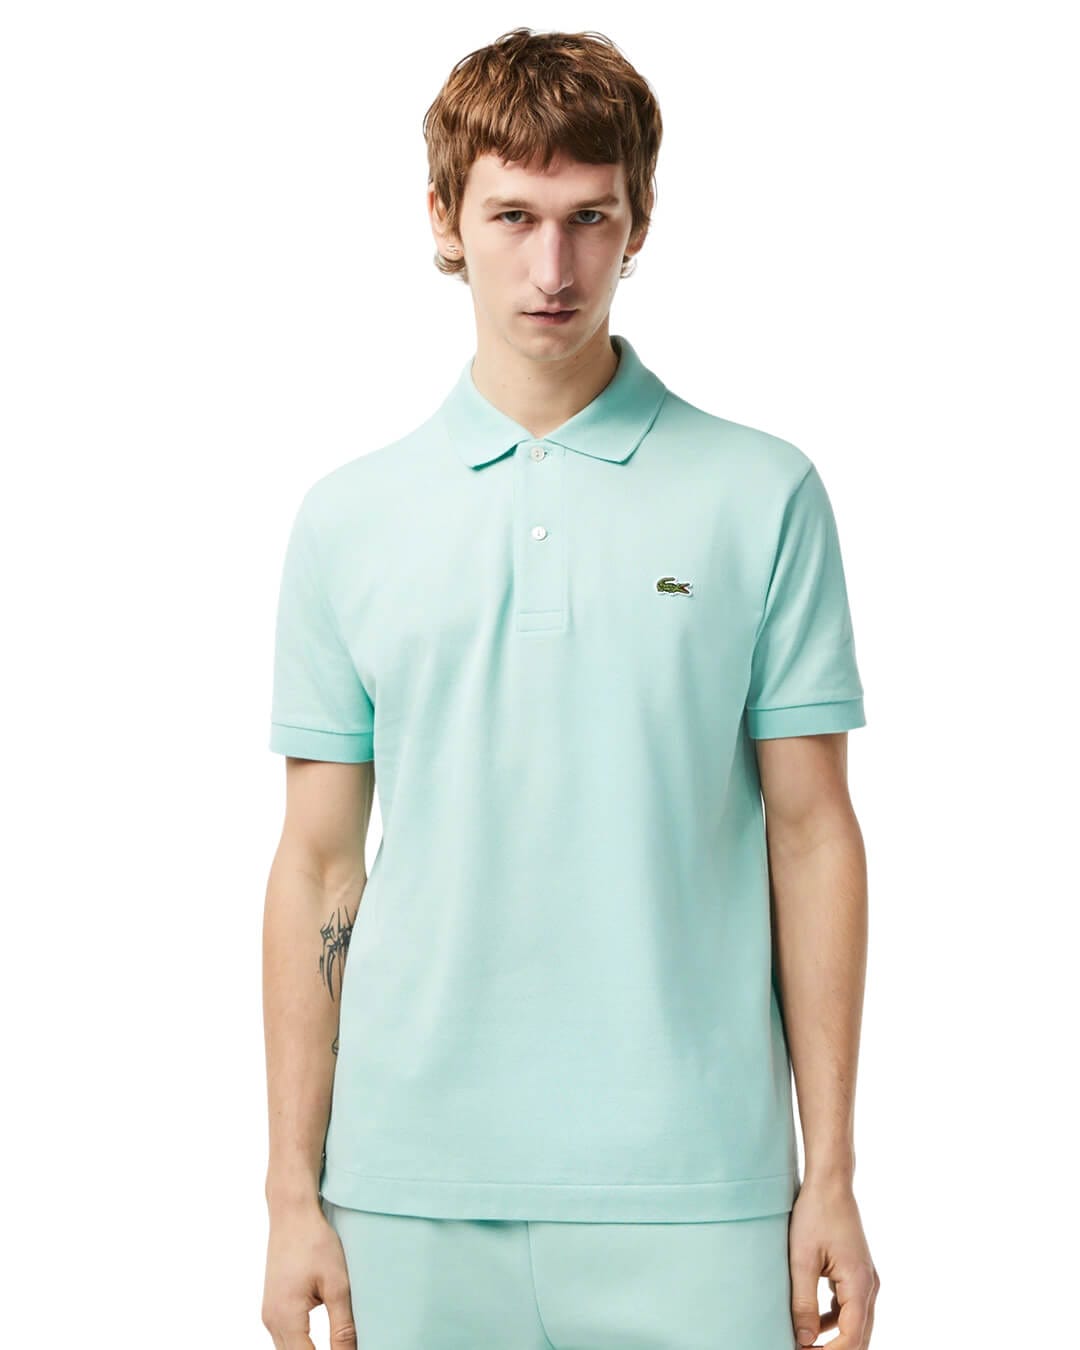 Lacoste Polo Shirts Lacoste Classic Fit L.12.12 Mint Green Polo Shirt